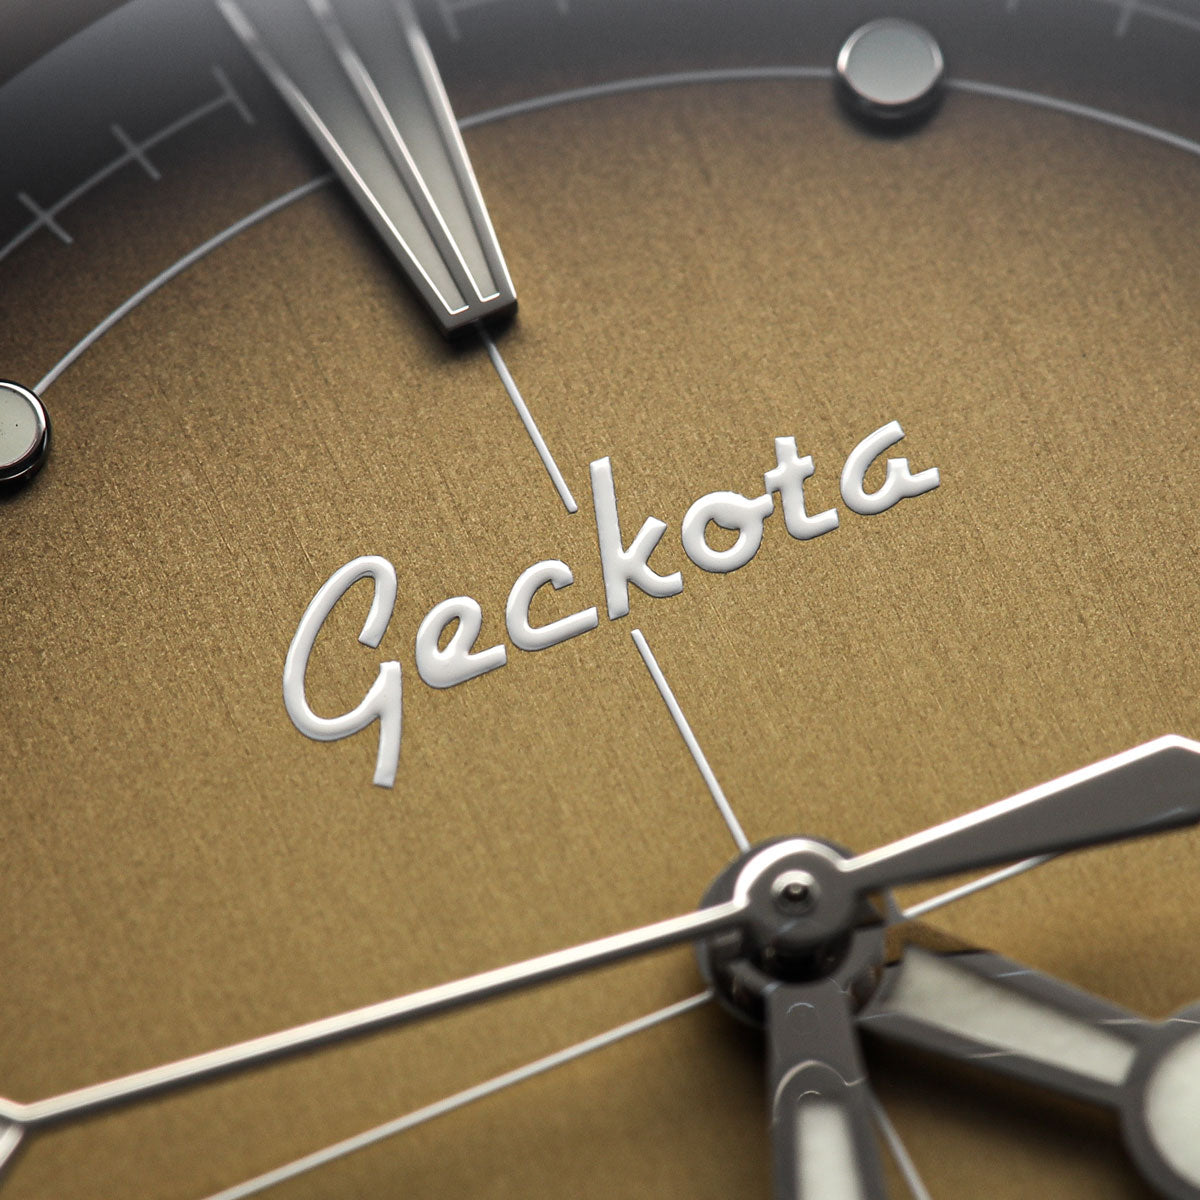 Geckota Pioneer Automatic Watch Brushed Beige Edition